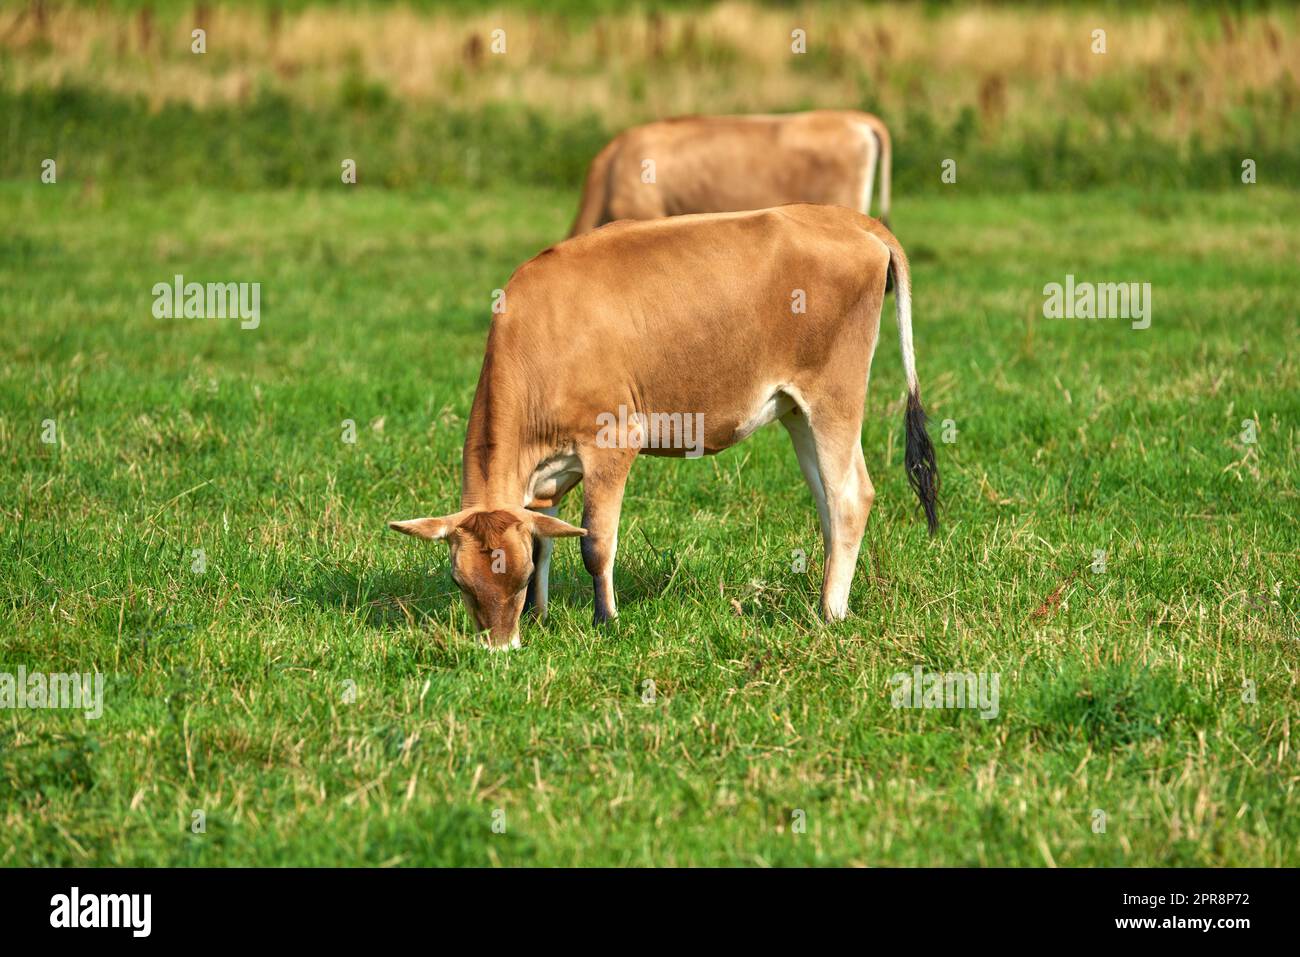 Two brown cows grazing on an organic green dairy farm in the countryside. Cattle or livestock in an open, empty and vast grassy field or meadow. Bovine animals on agricultural and sustainable land Stock Photo